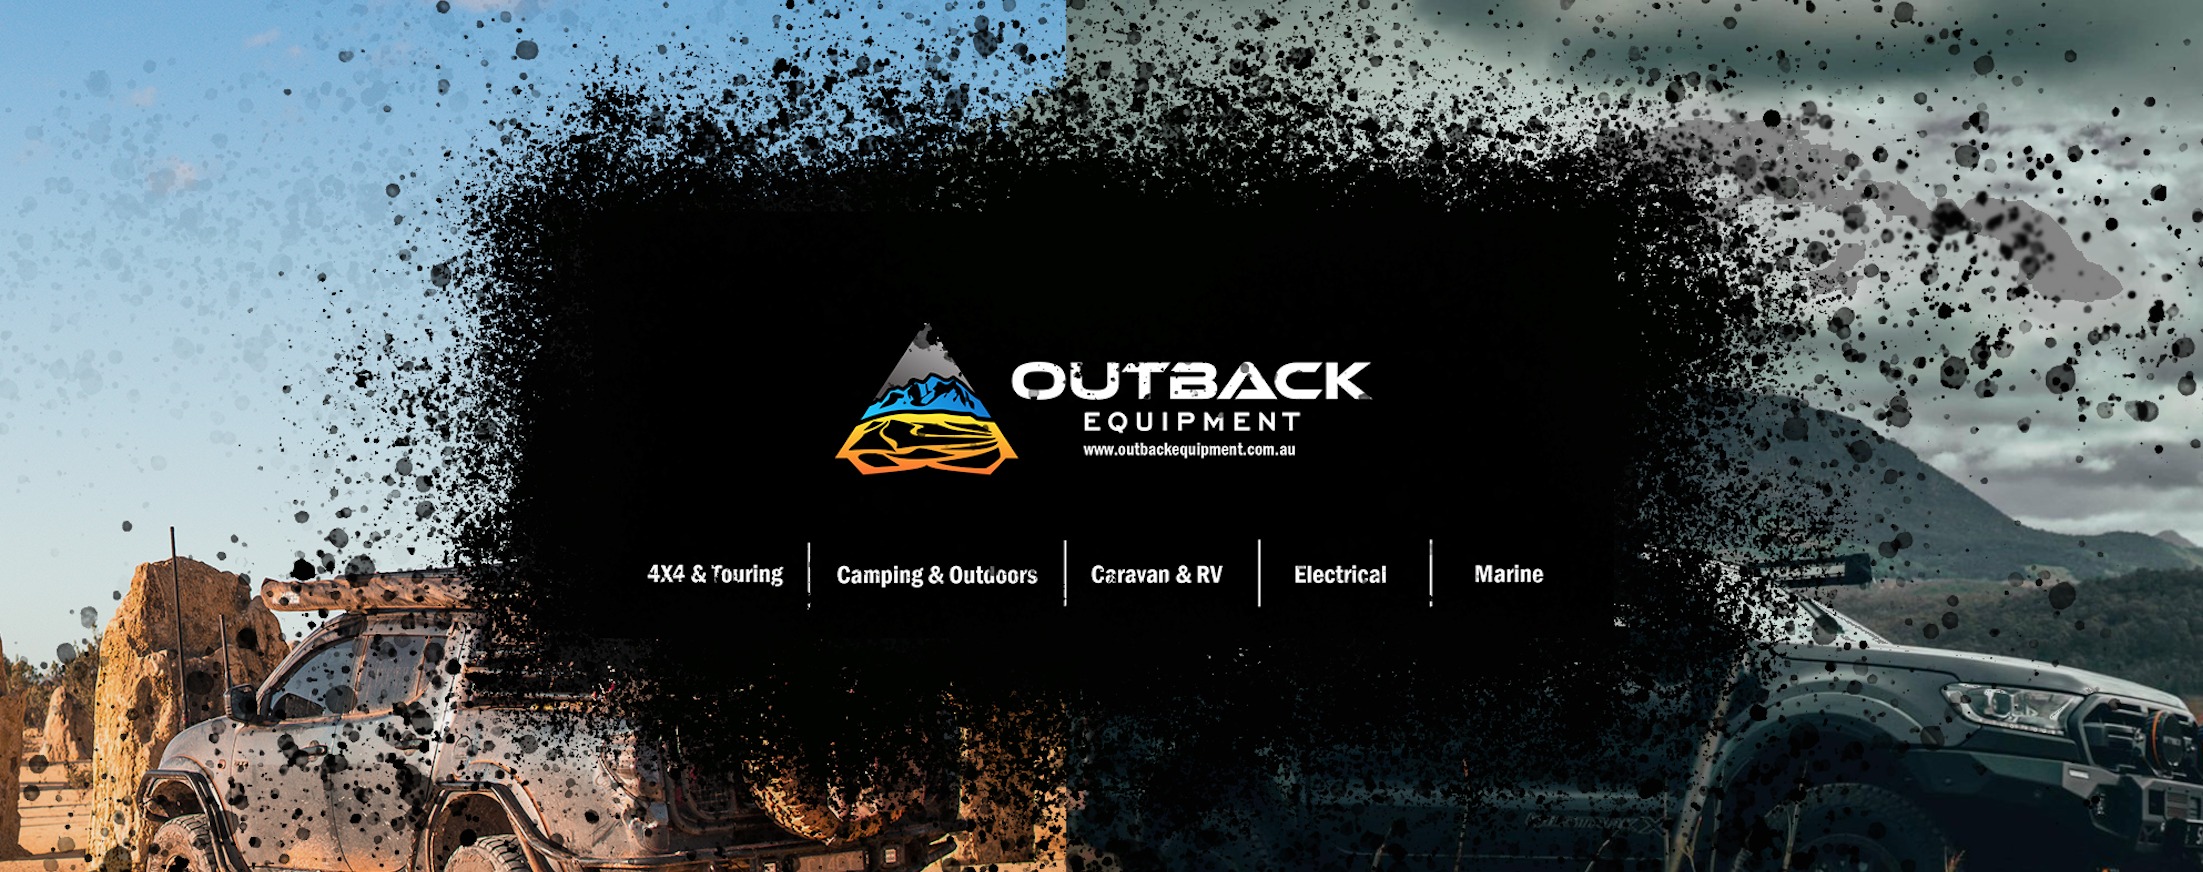 Outback Equipment extra 5% OFF when you sign up